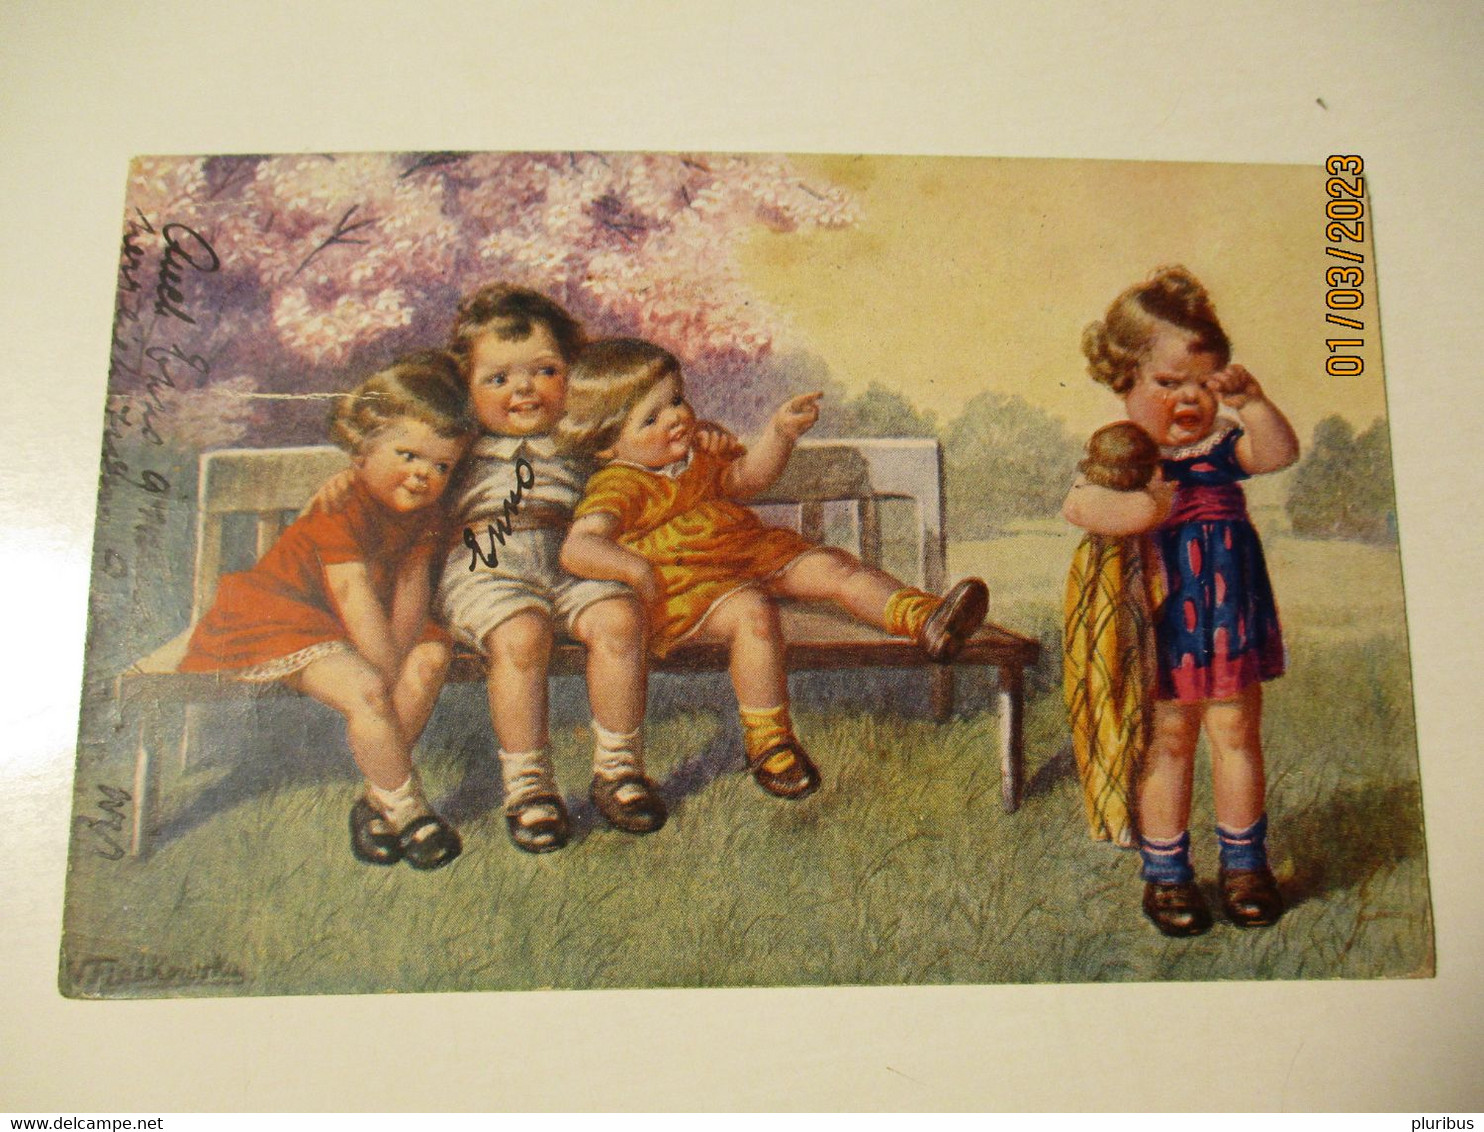 FIALKOWSKA , CHILDREN , CRYING GIRL WITH DOLL , 2-1 - Fialkowska, Wally